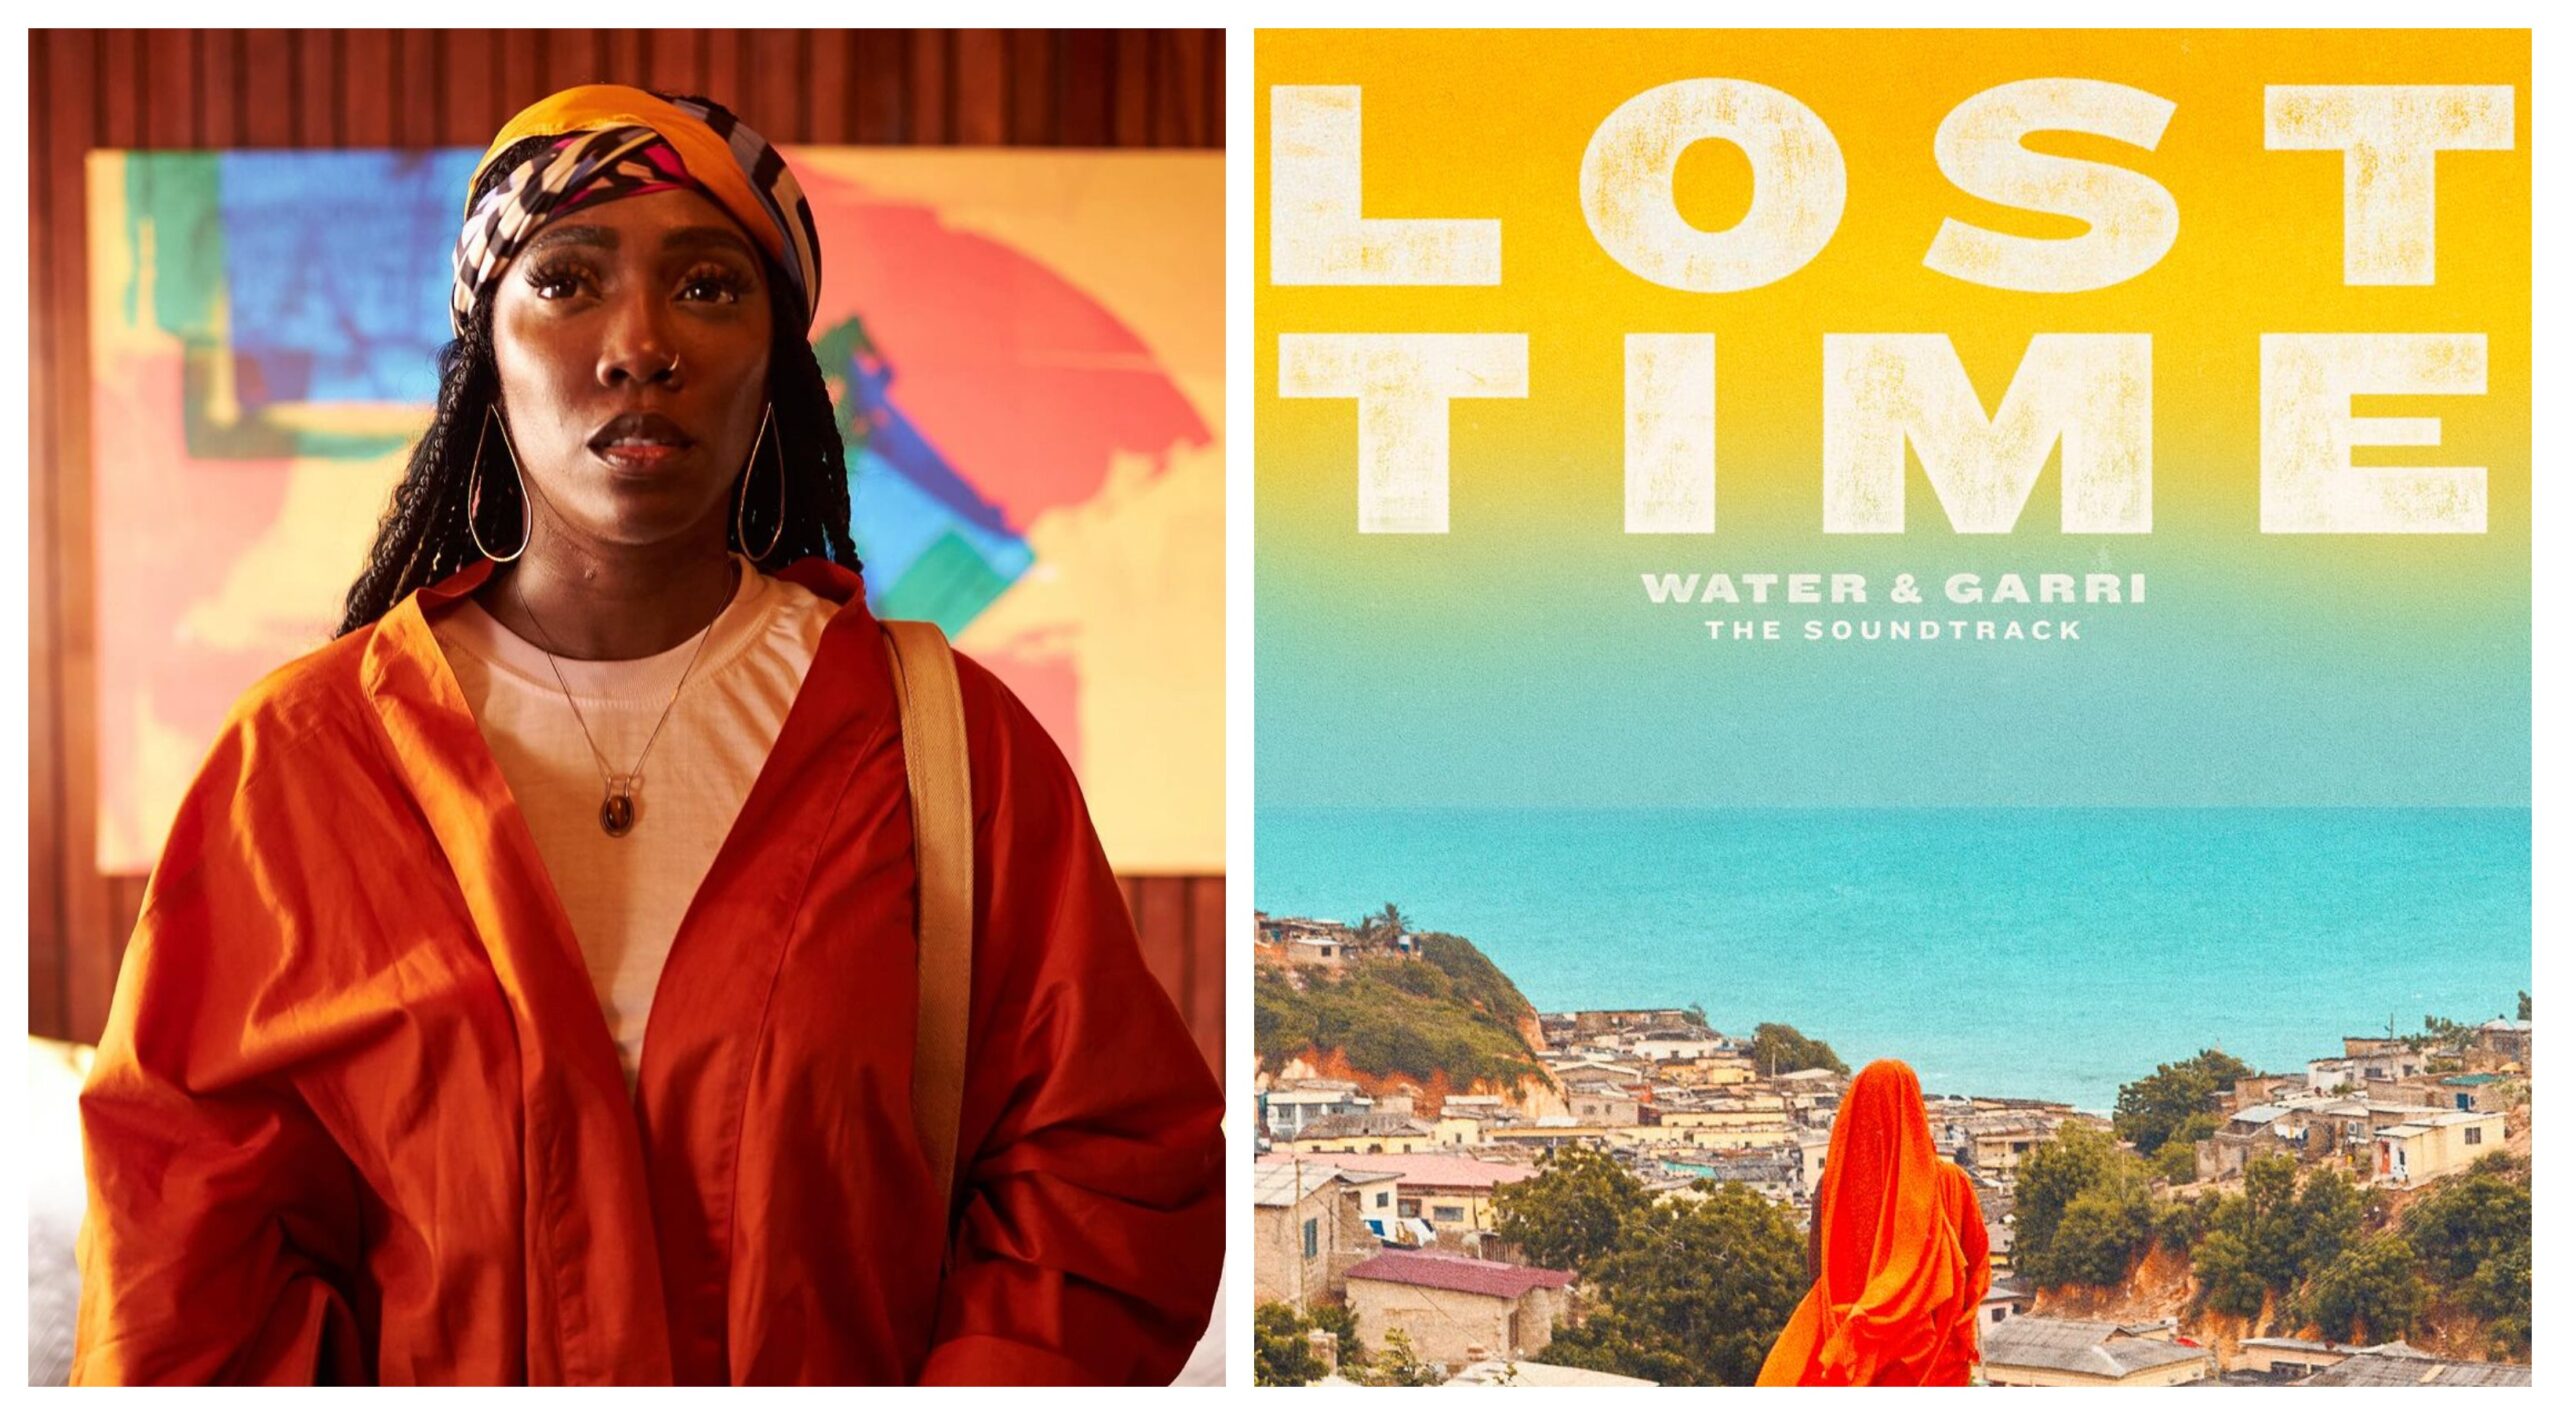 New Song: Tiwa Savage – ‘Lost Time’ [Water & Garri – The Soundtrack]